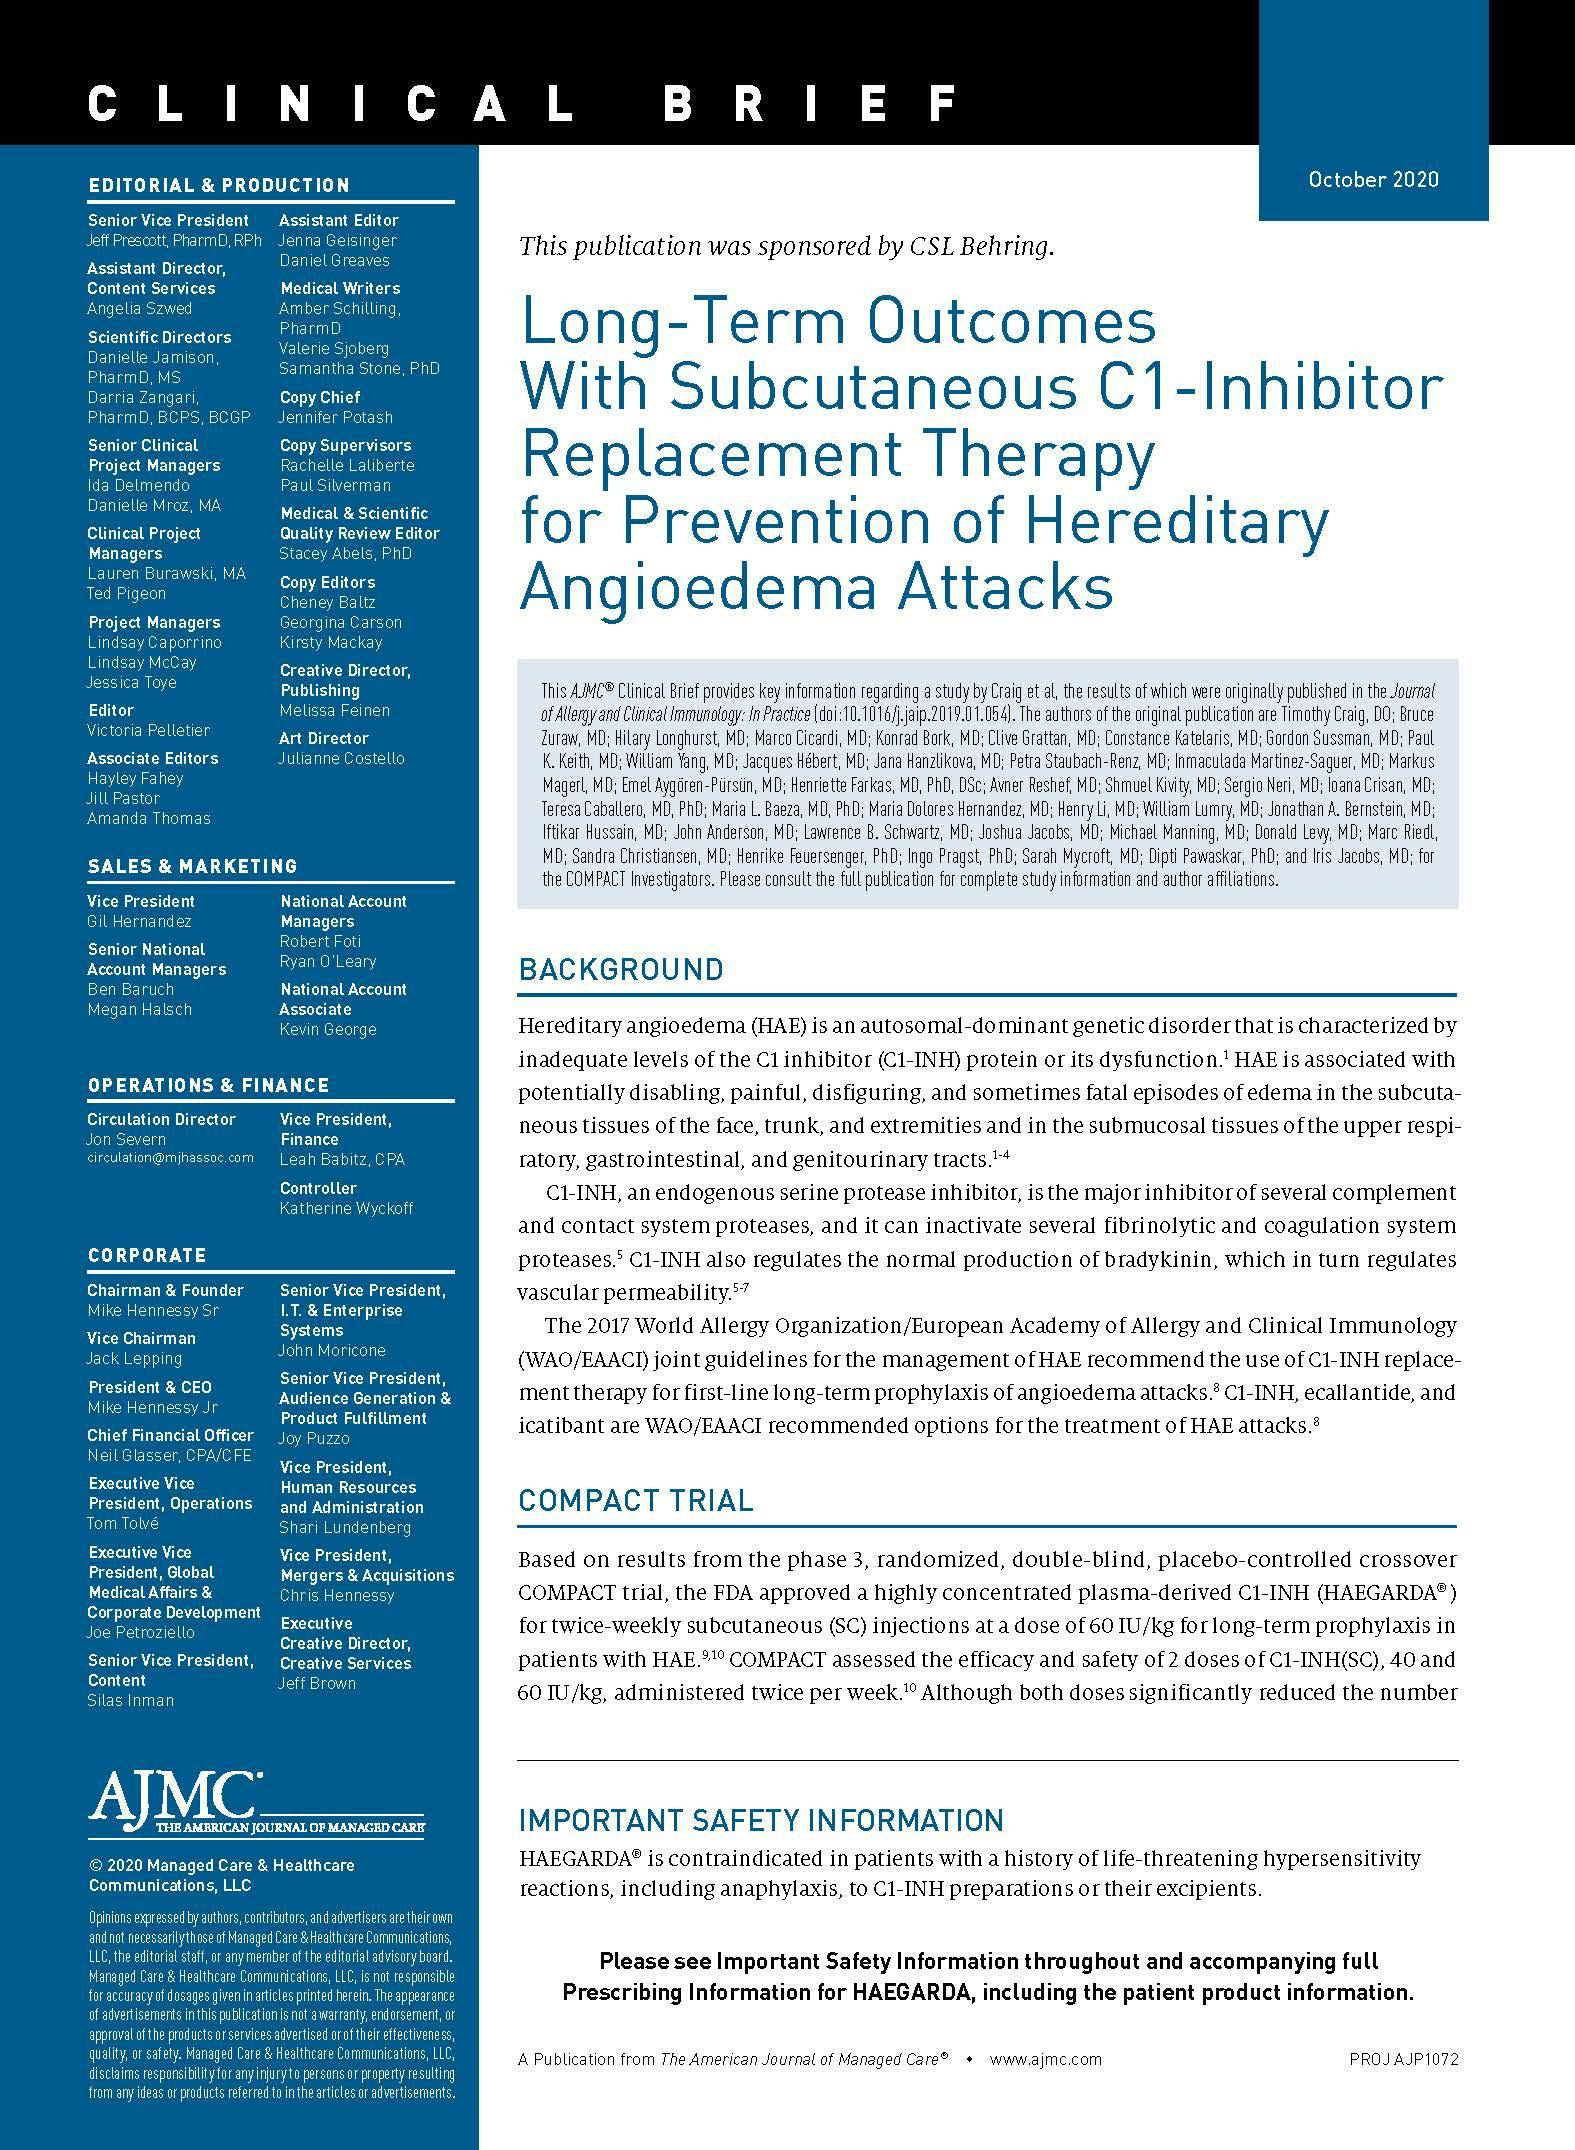 Long-Term Outcomes With Subcutaneous C1-Inhibitor Replacement Therapy for Prevention of Hereditary Angioedema Attacks